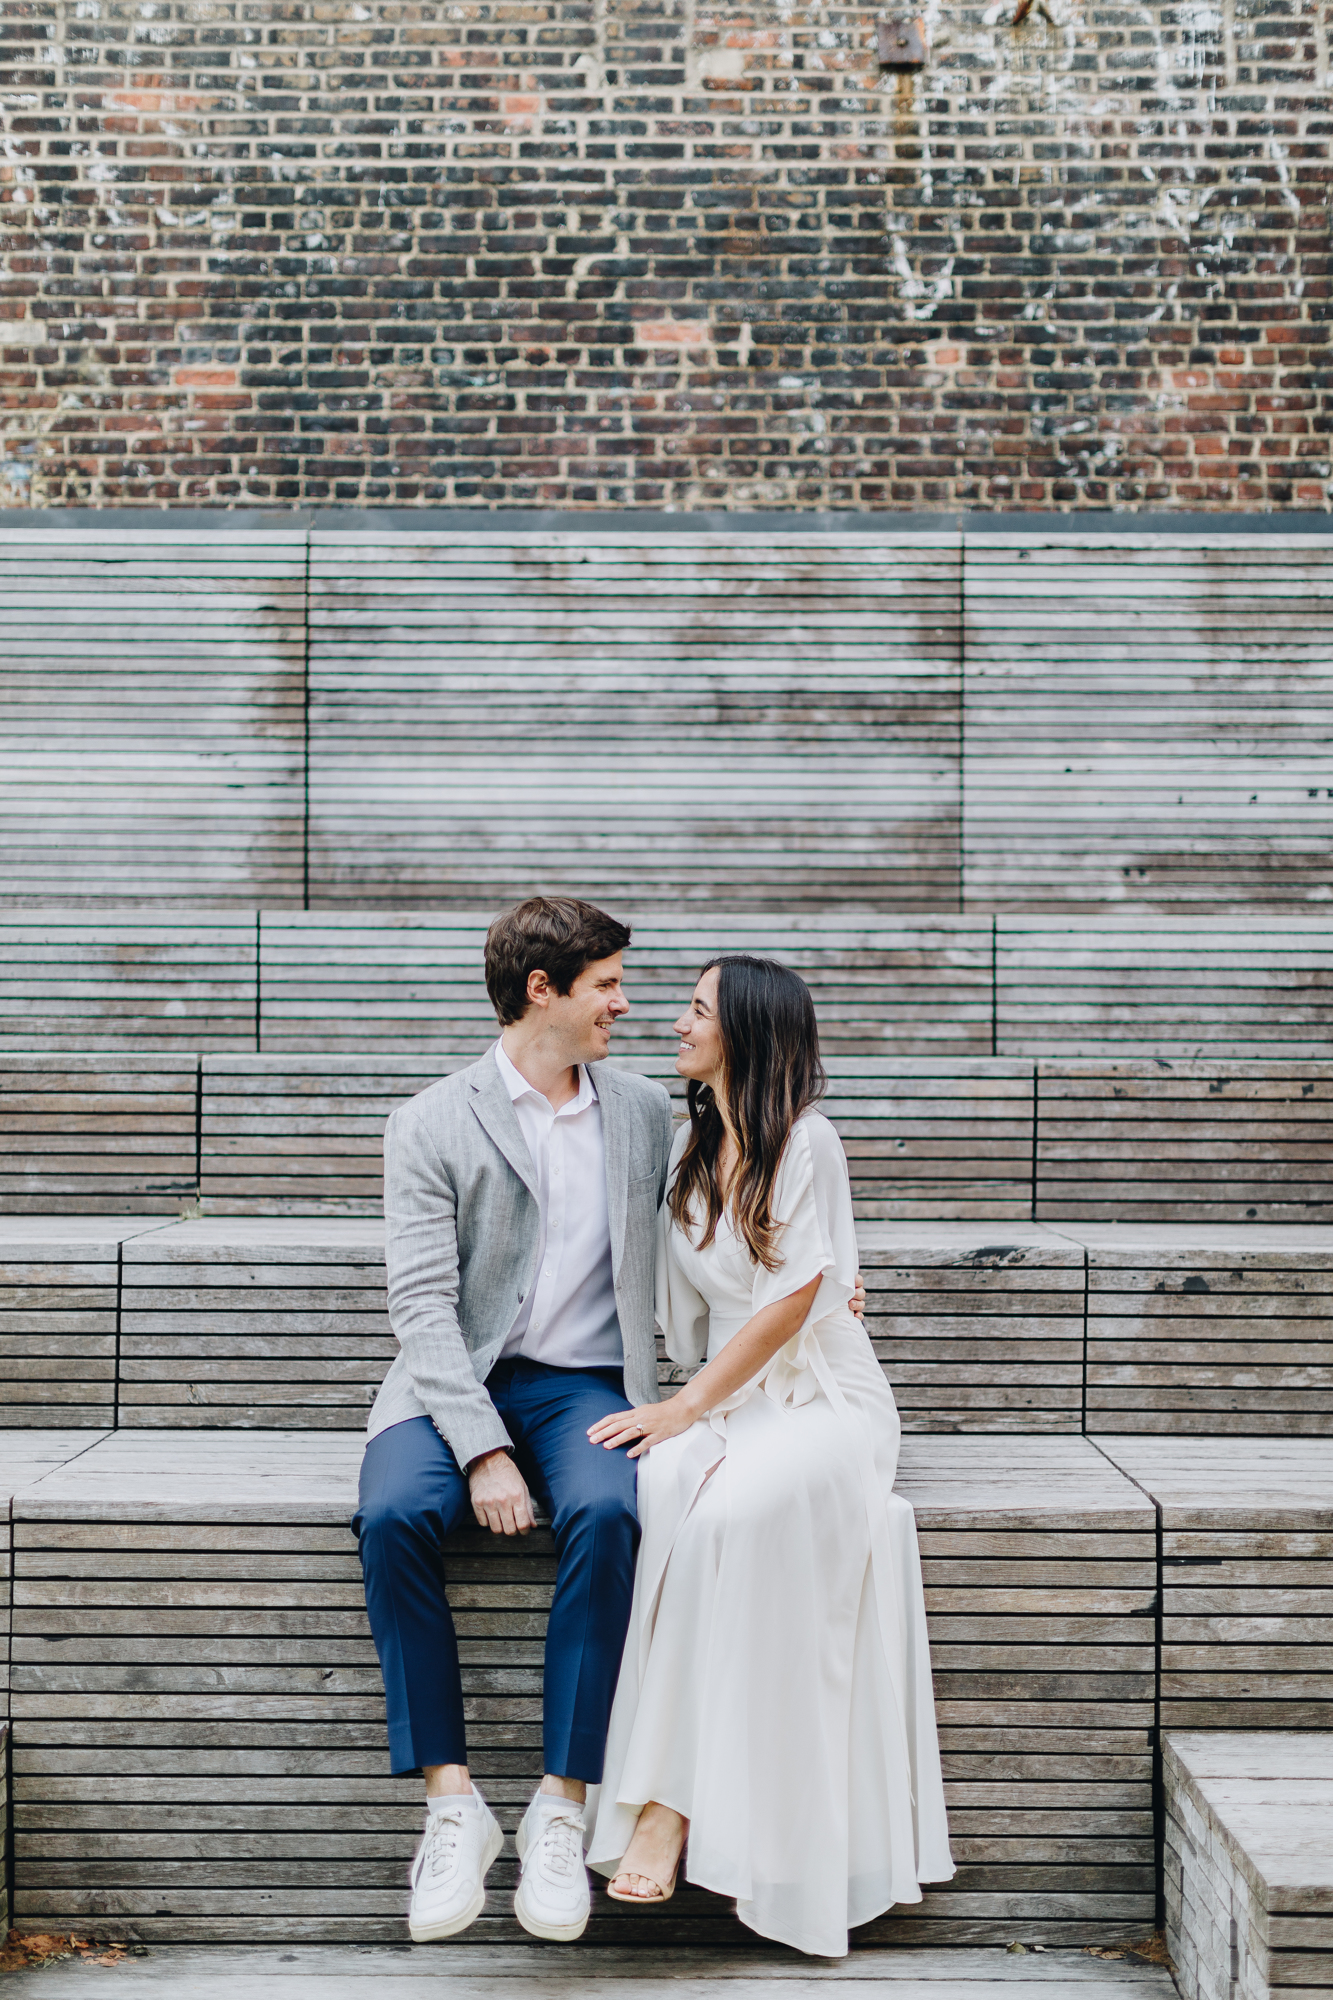 Wedding photography on the High Line in New York